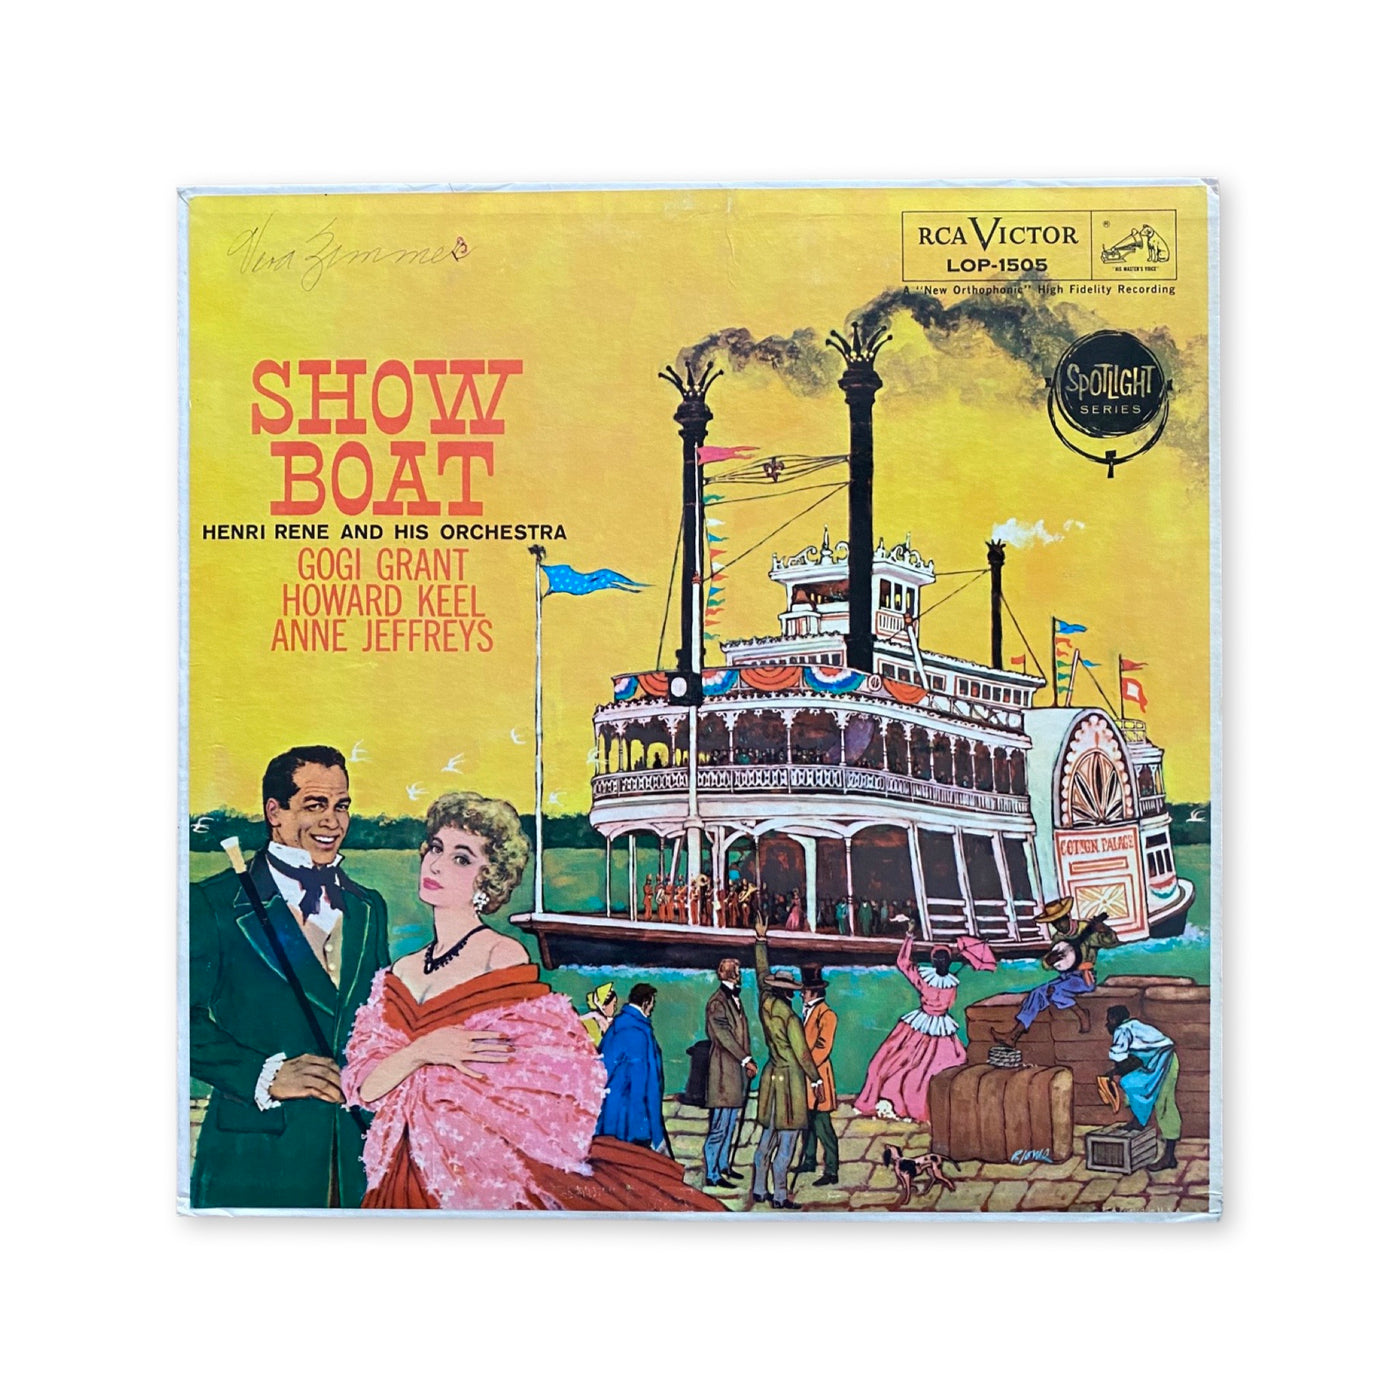 Henri René And His Orchestra / Gogi Grant / Howard Keel / Anne Jeffreys - Show Boat